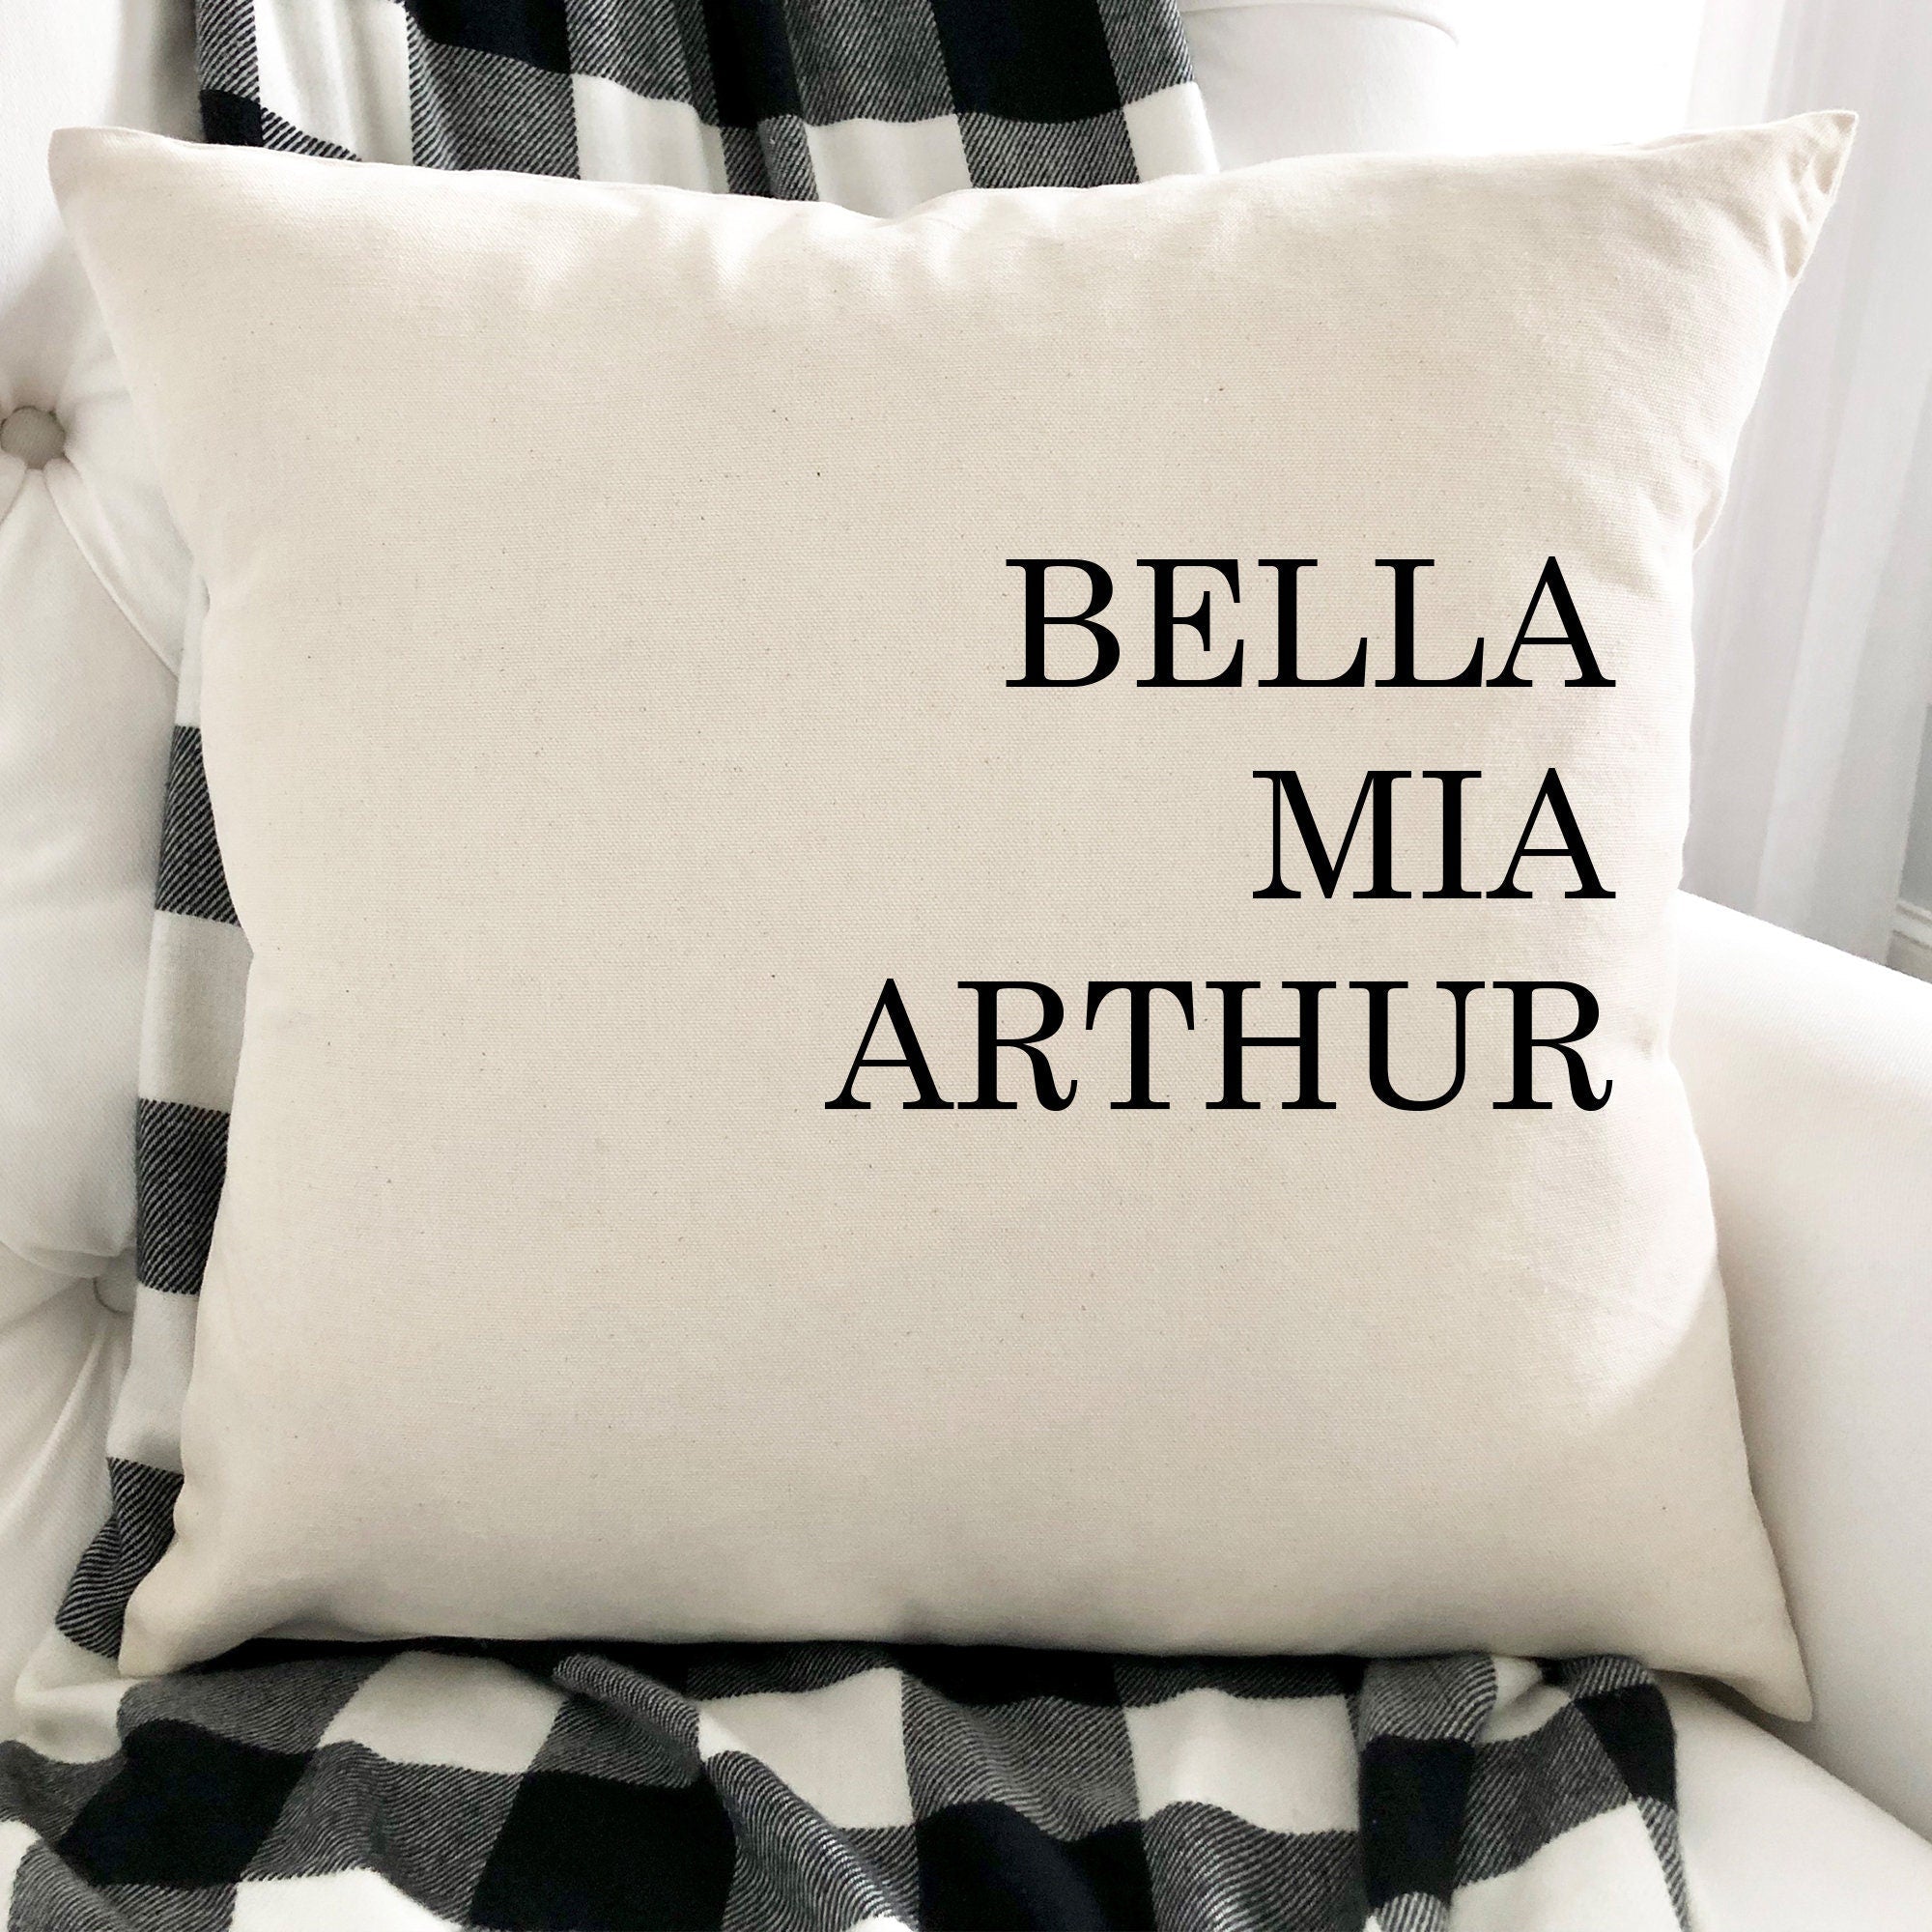 Grandma Or Mum Cushion With Family Names, Christmas Gift For Nanny Or Mother